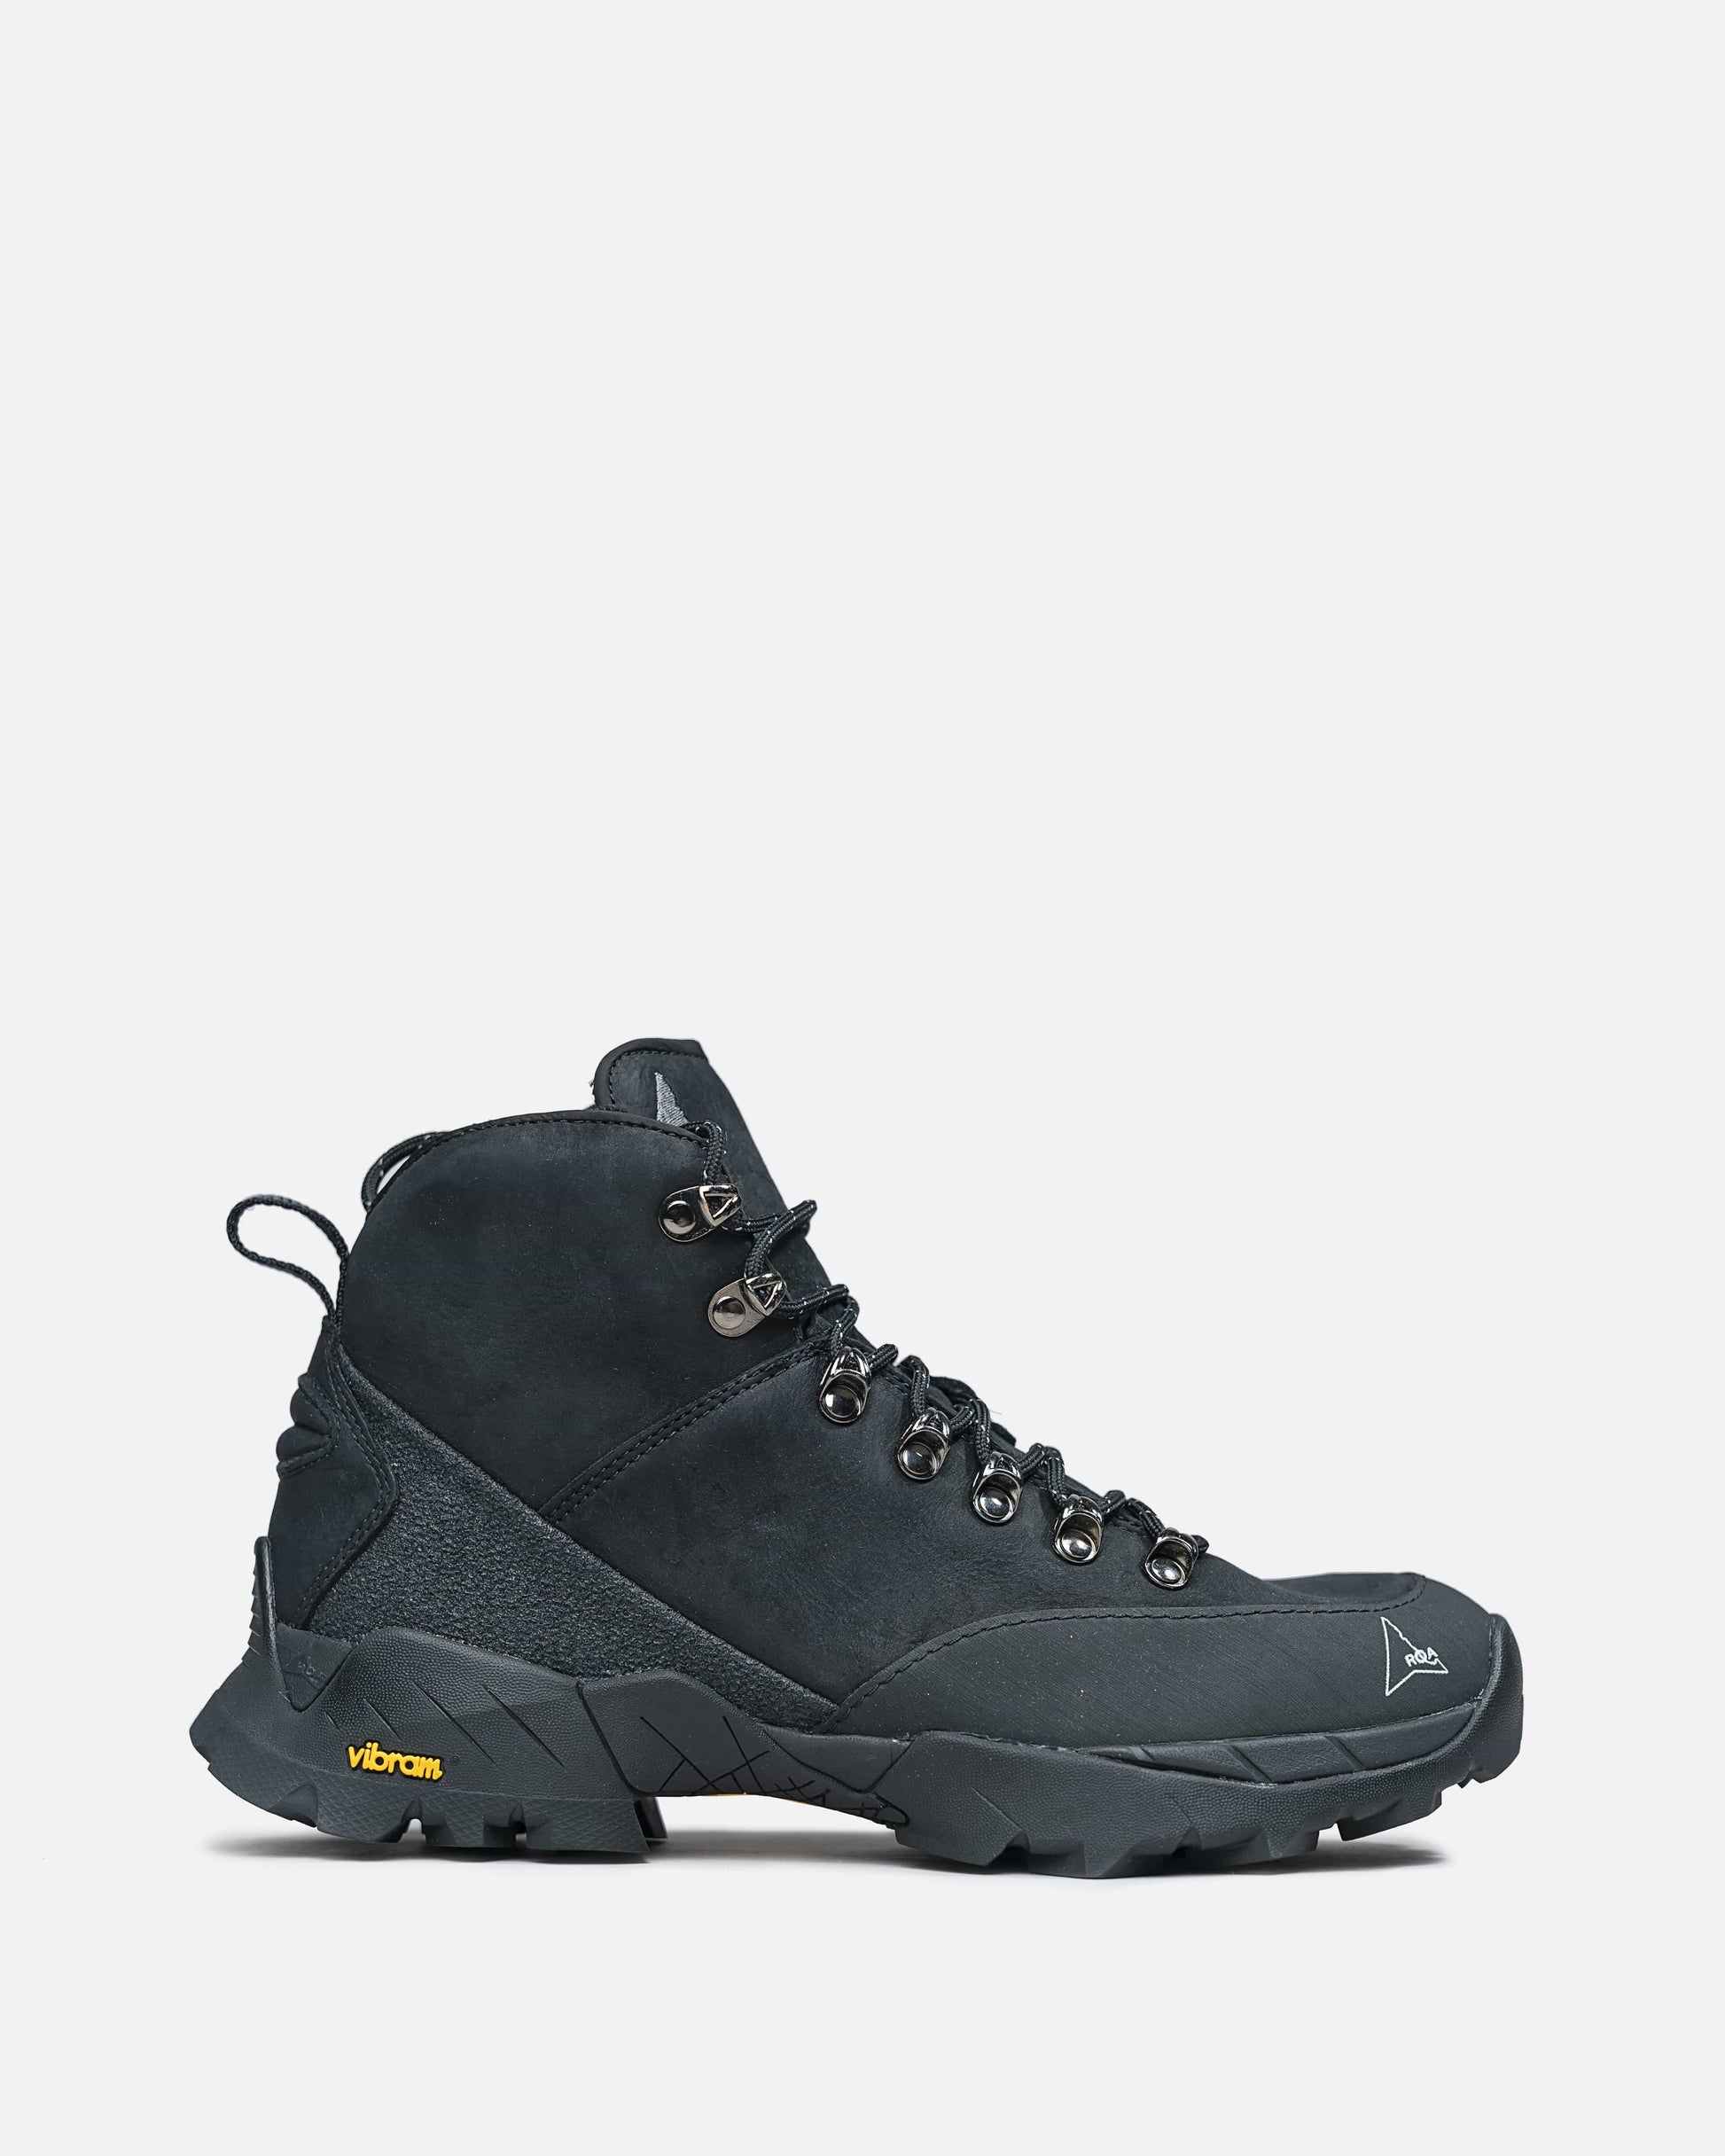 Roa Men's Boots Andreas Hiking Boot in Black